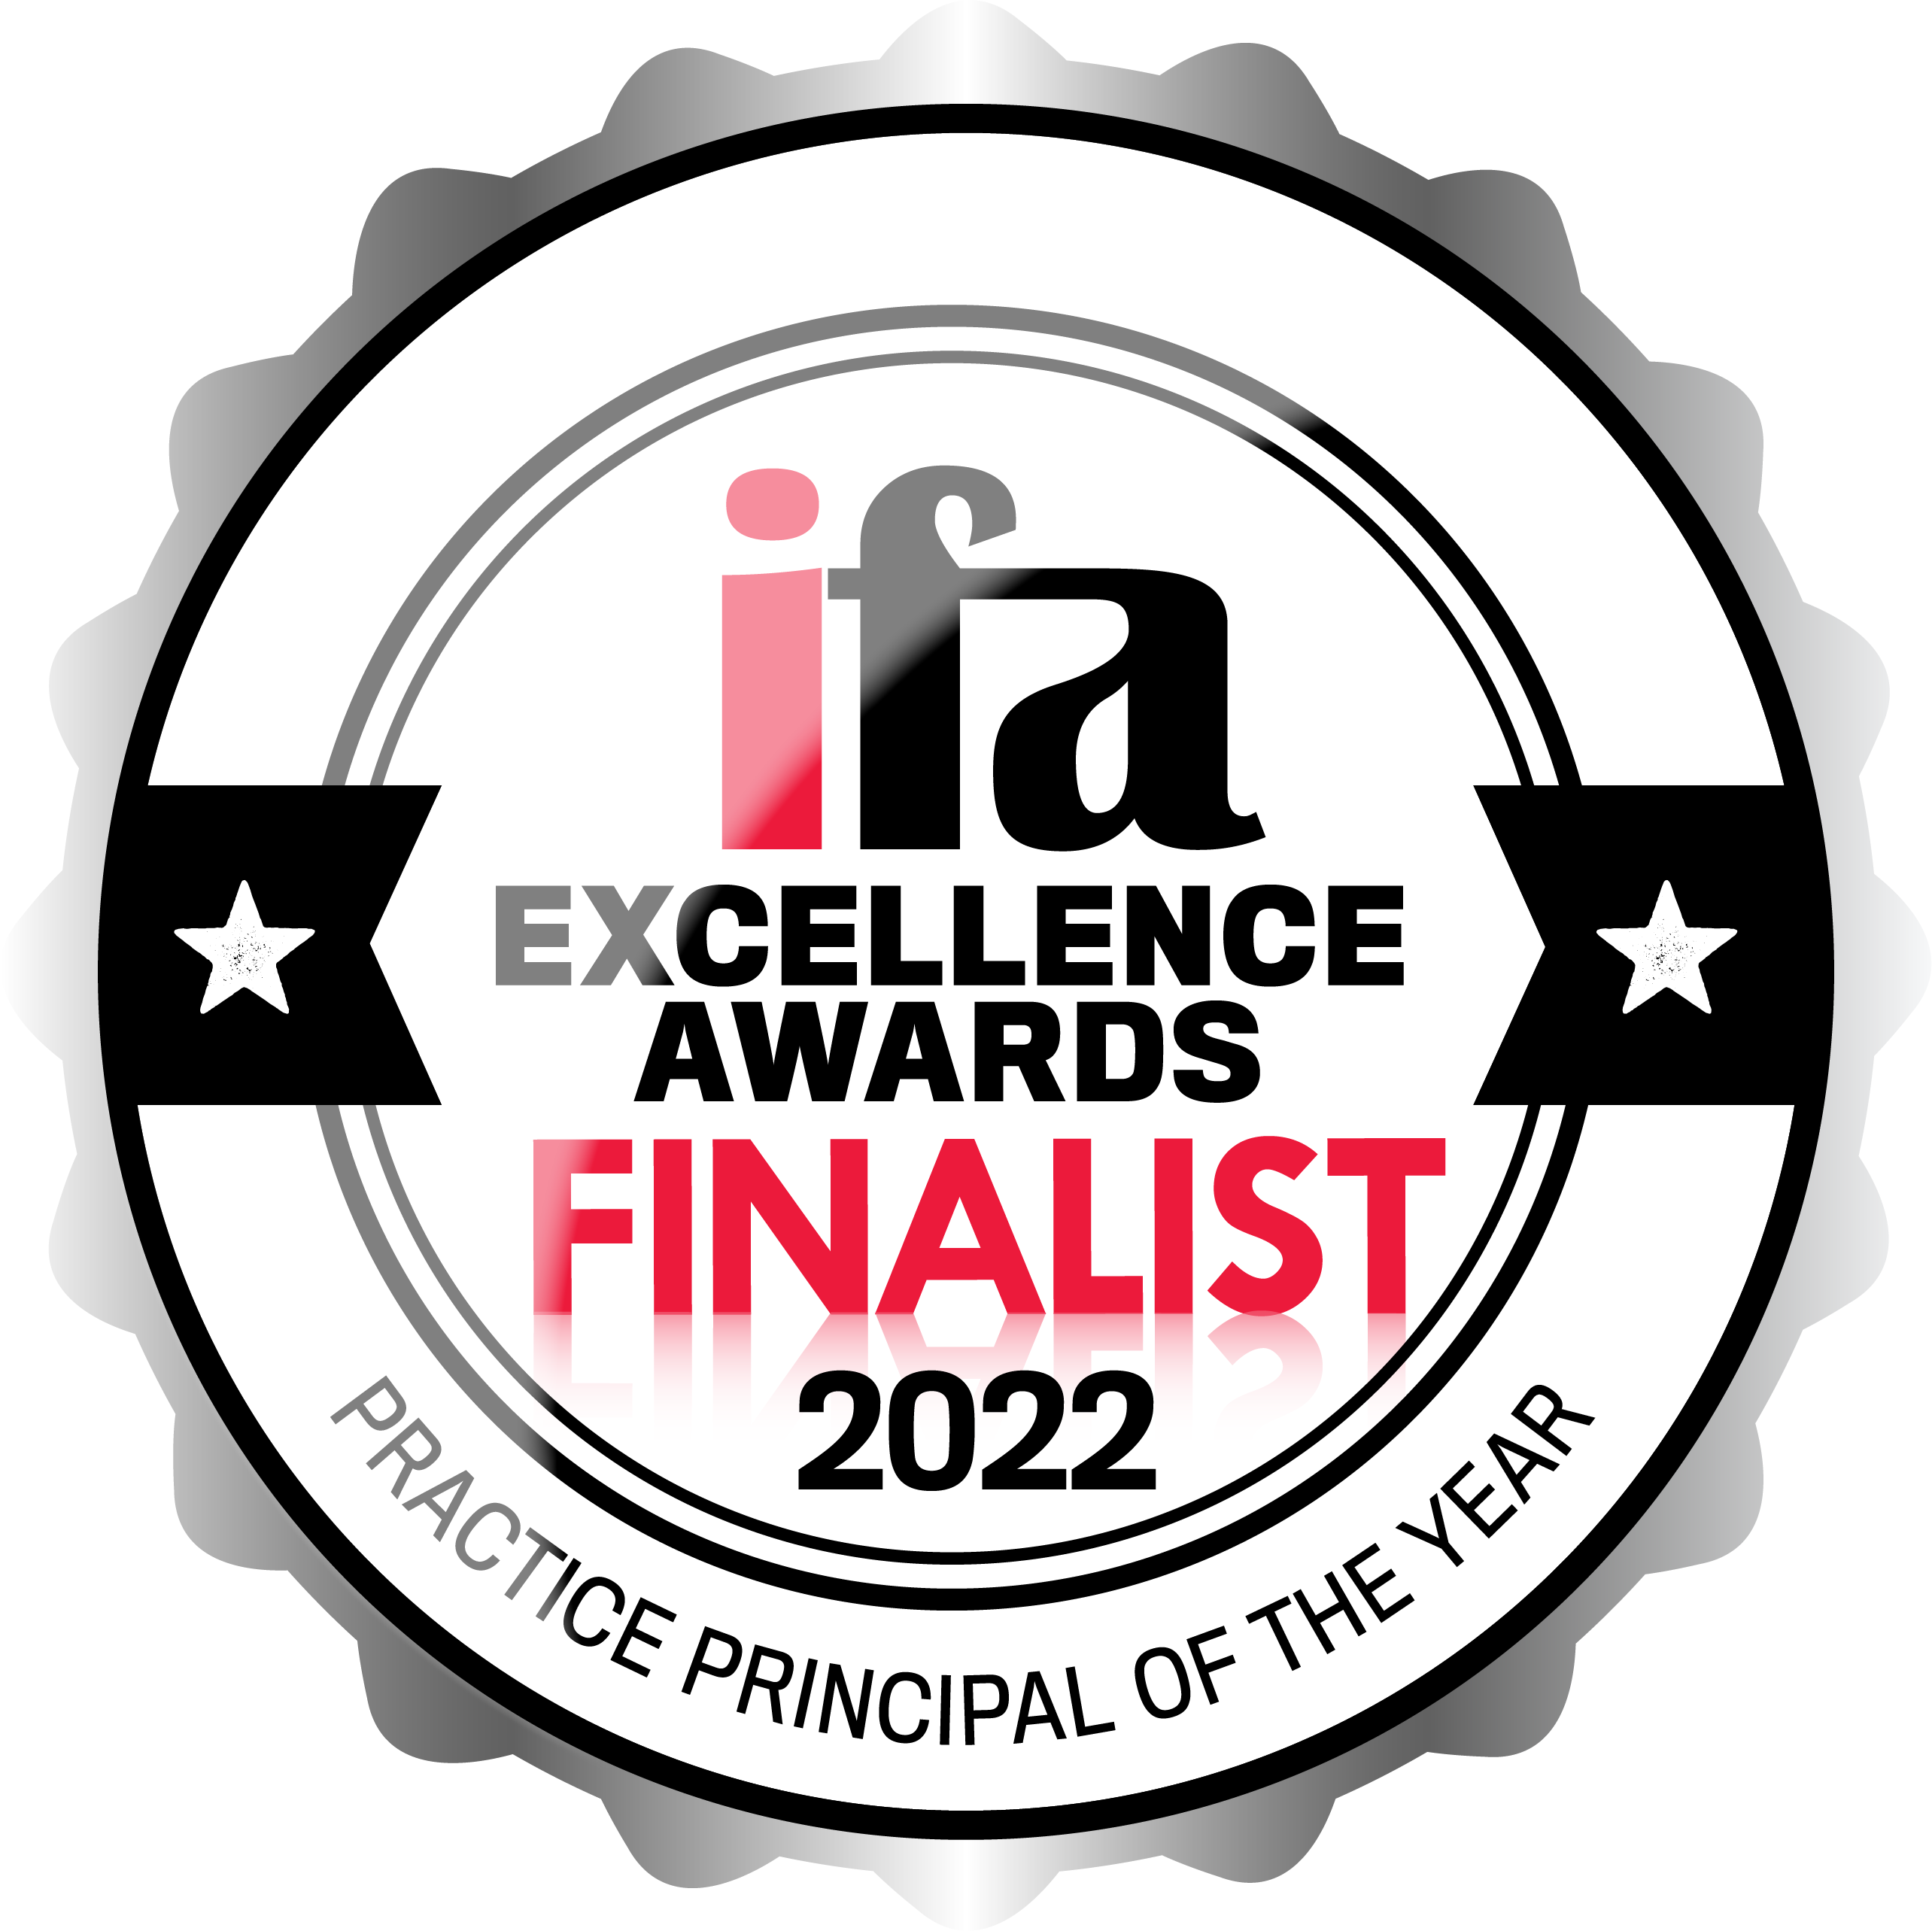 IFA Excellence Awards FINALIST – Holistic Principal of the Year 2022